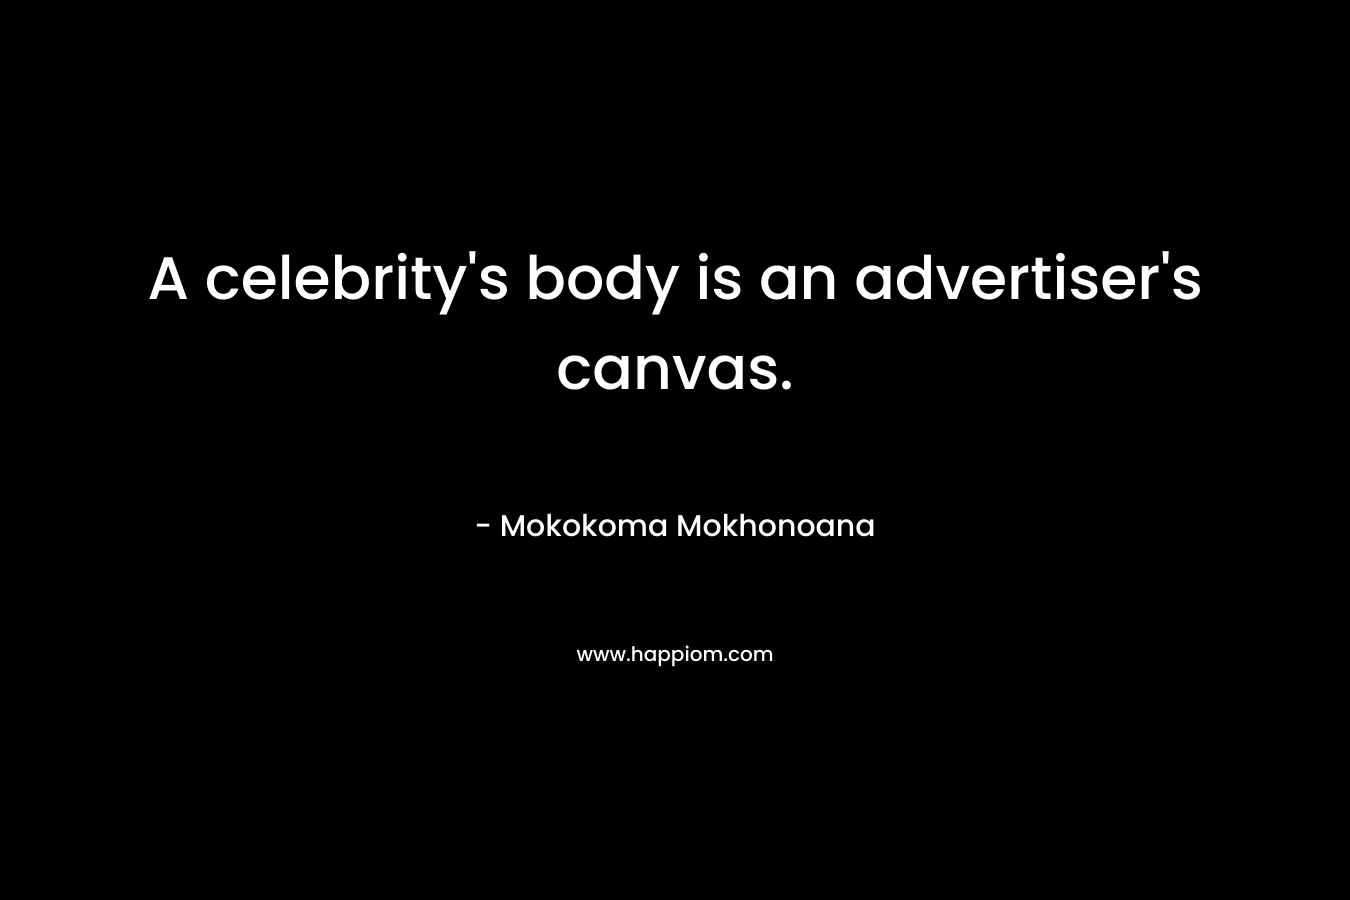 A celebrity's body is an advertiser's canvas.